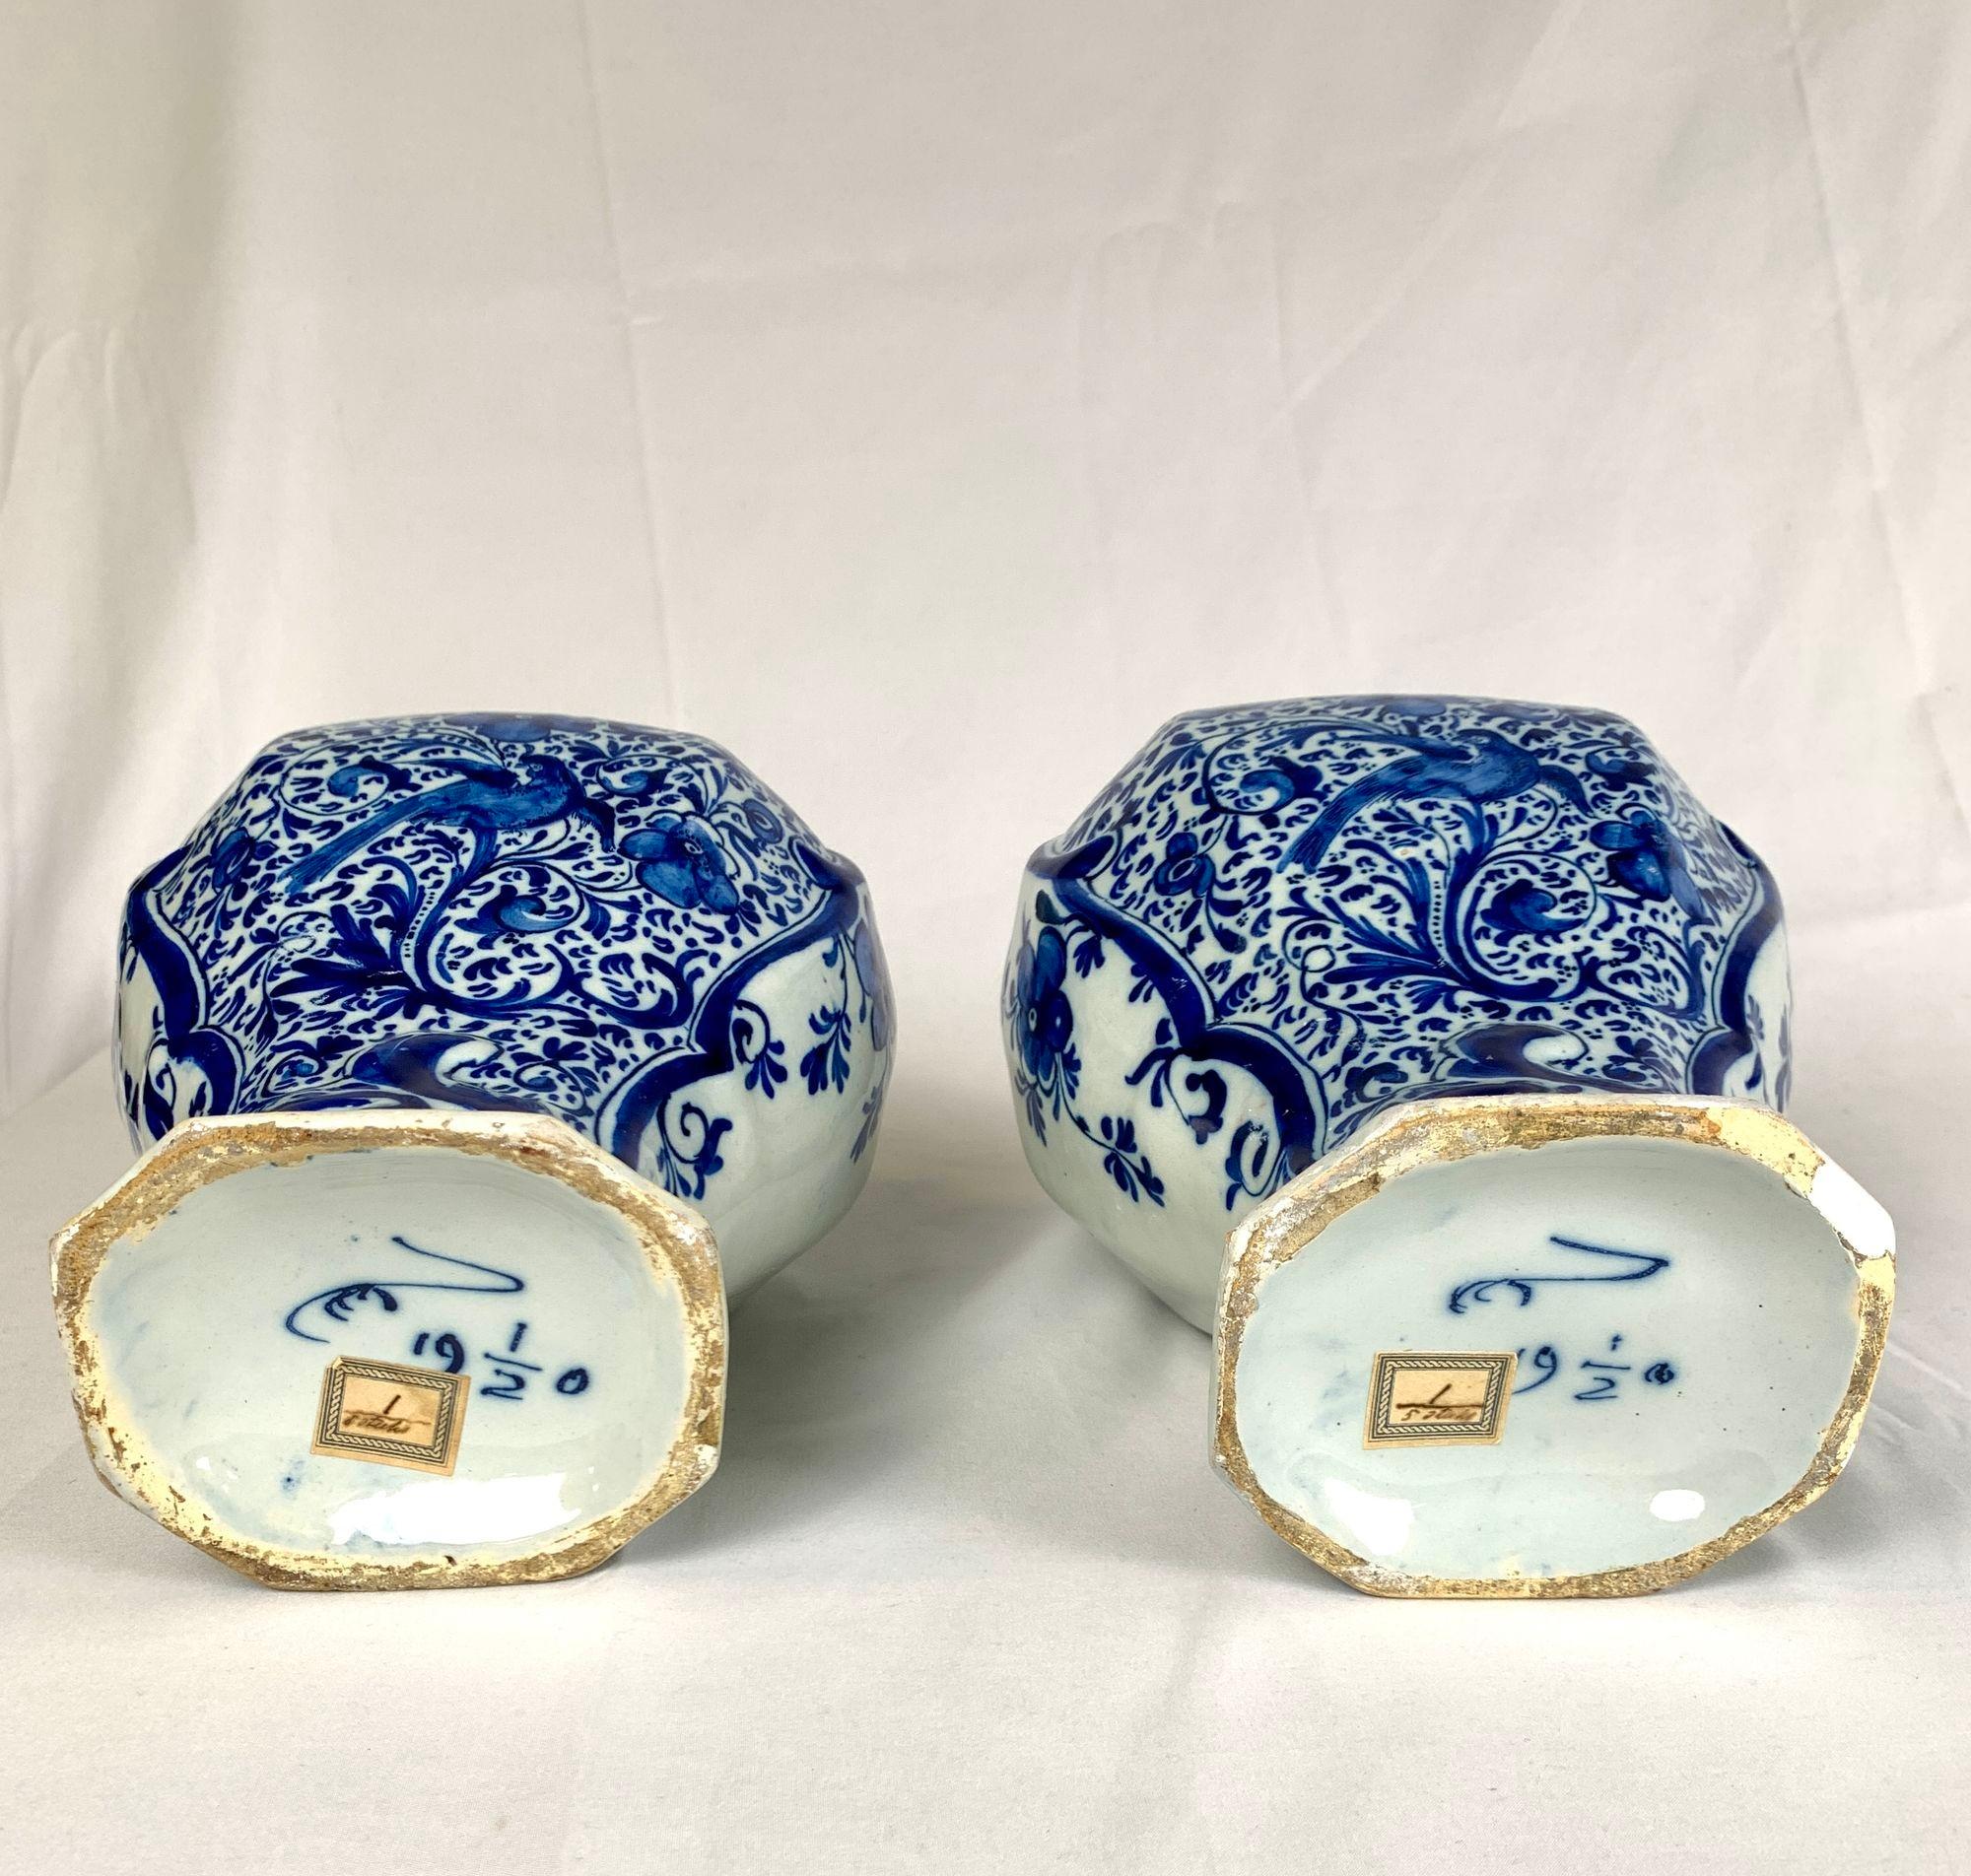 Pair Blue and White Delft Mantle Jars Made by 